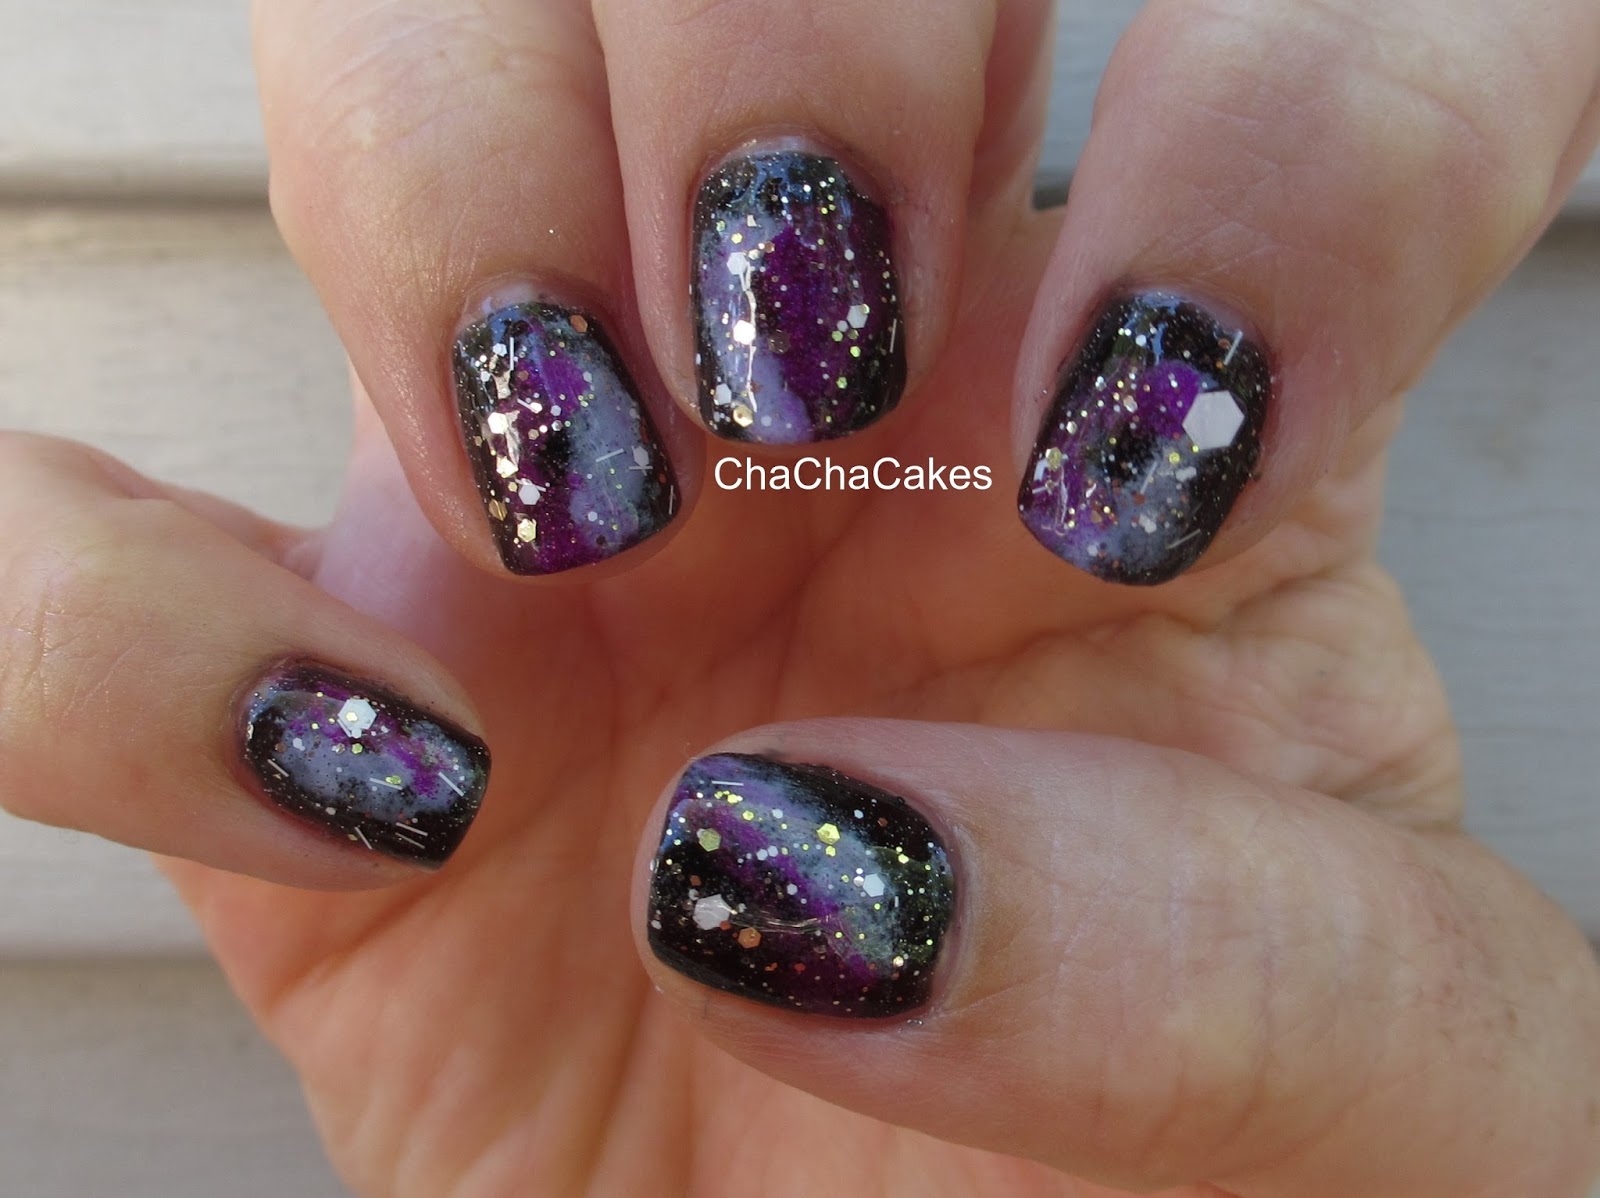 Cha Cha Cakes Nails: Day 19 in the 31 Day Nail Art Challenge